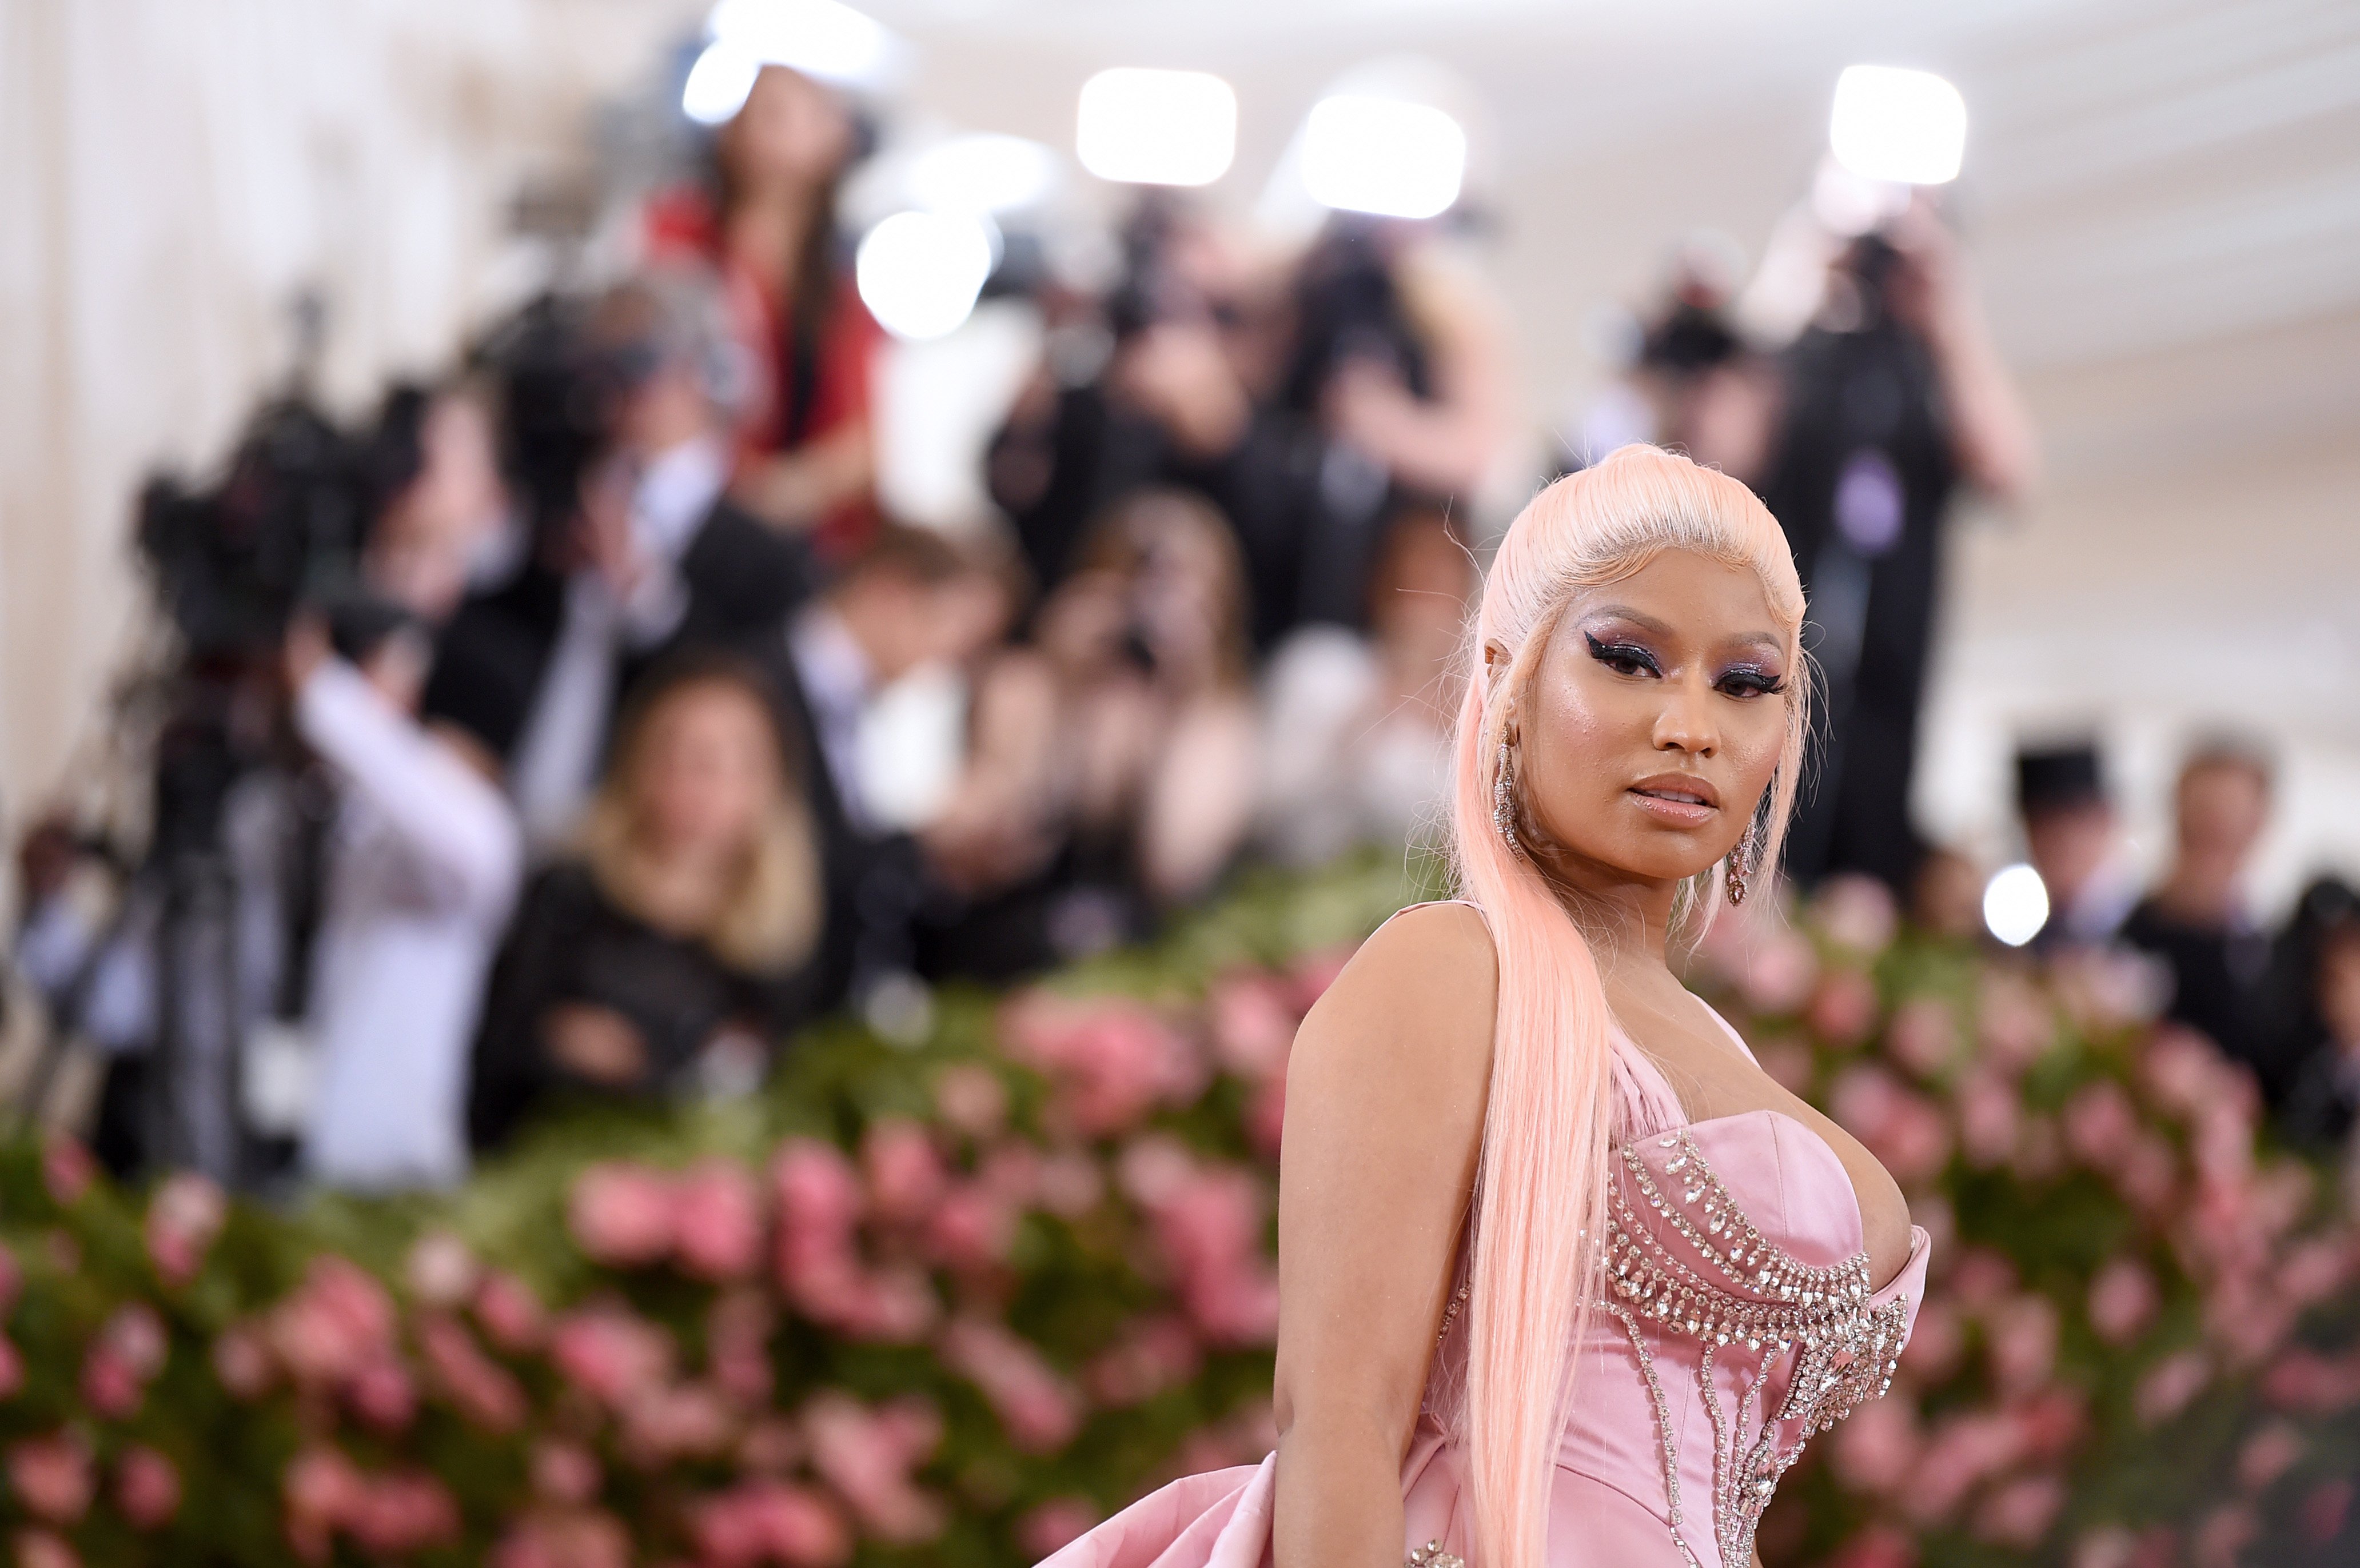 Nicki Minaj arrives at the Met Gala on May 6, 2019 in New York City. | Photo: Getty Images